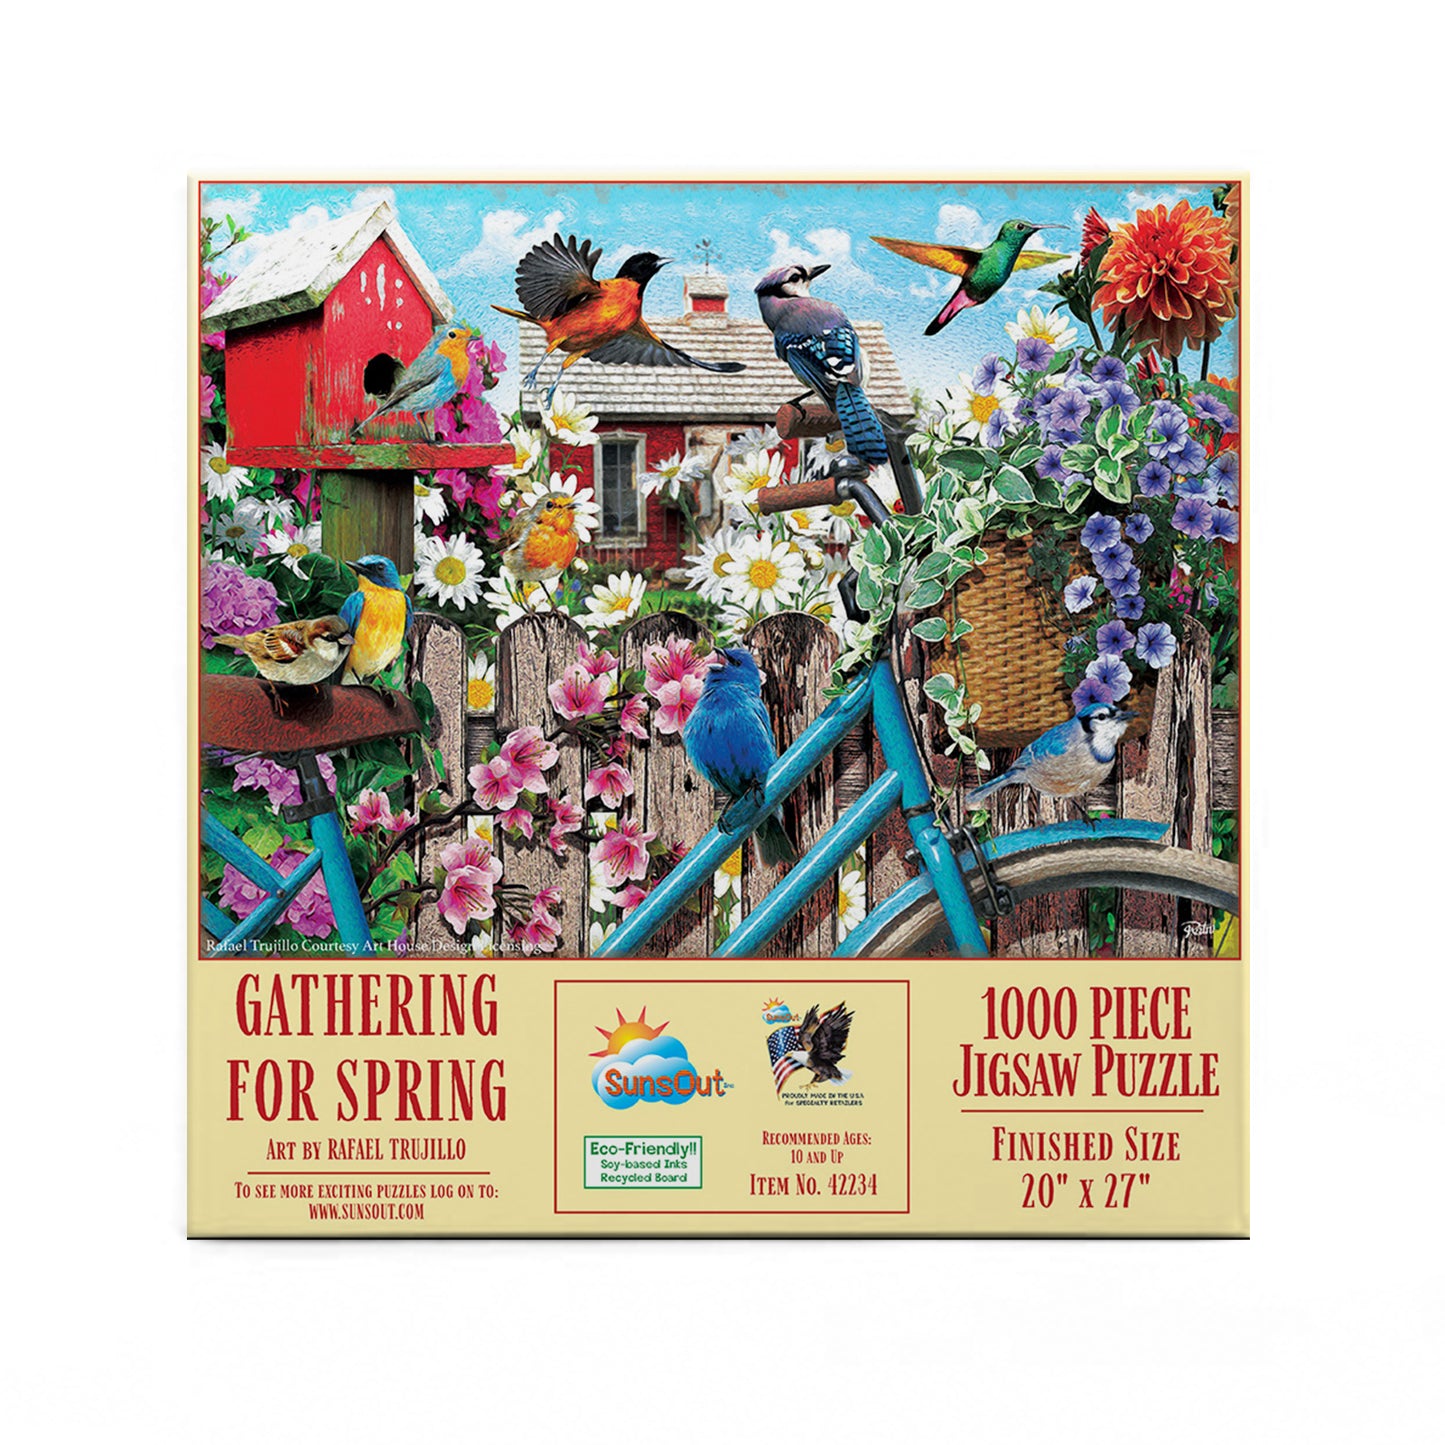 Gathering for Spring - 1000 Piece Jigsaw Puzzle